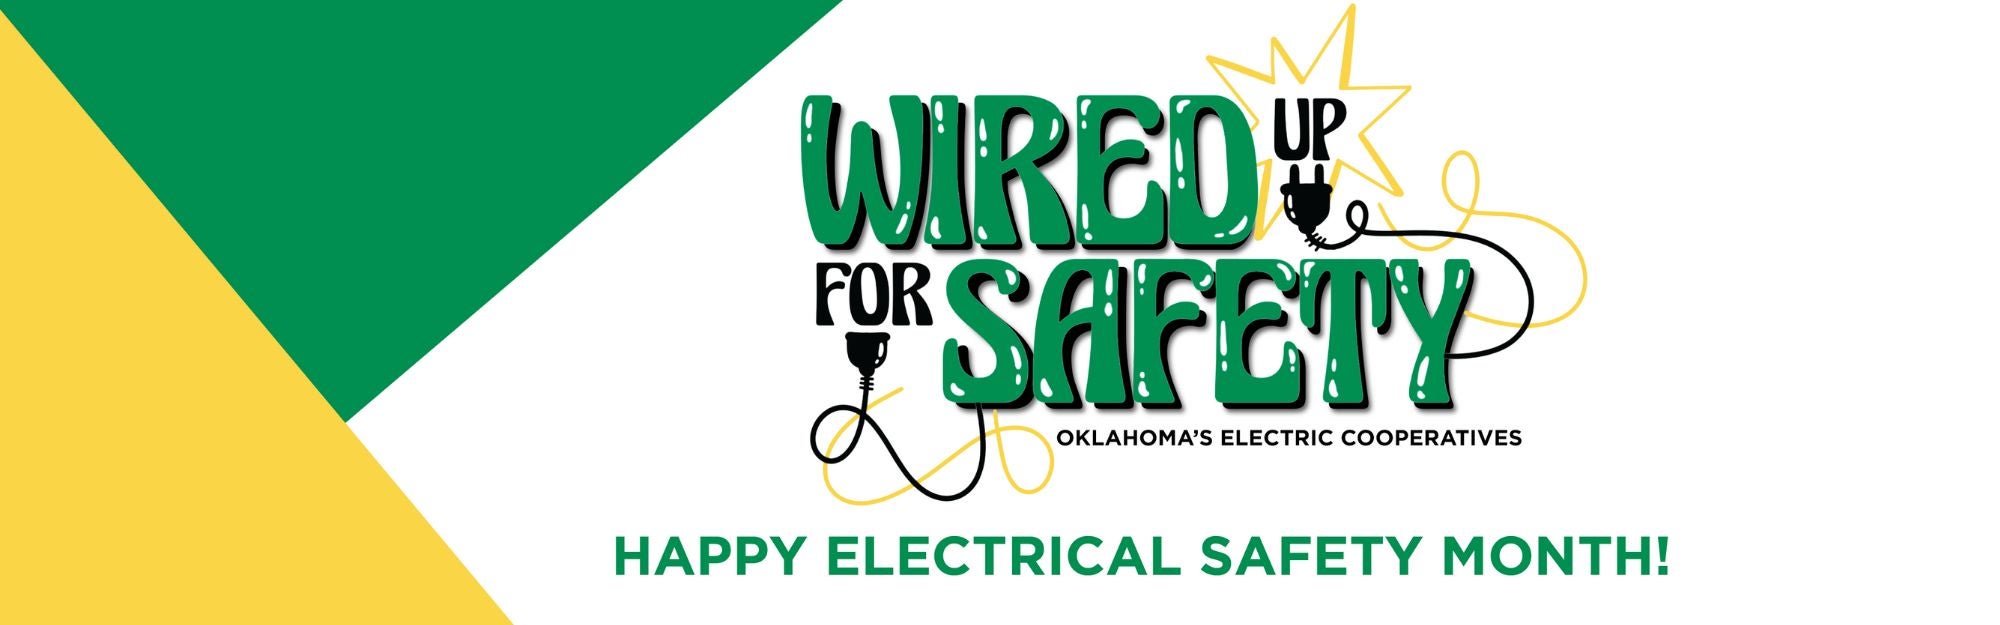 Wired up for Safety!